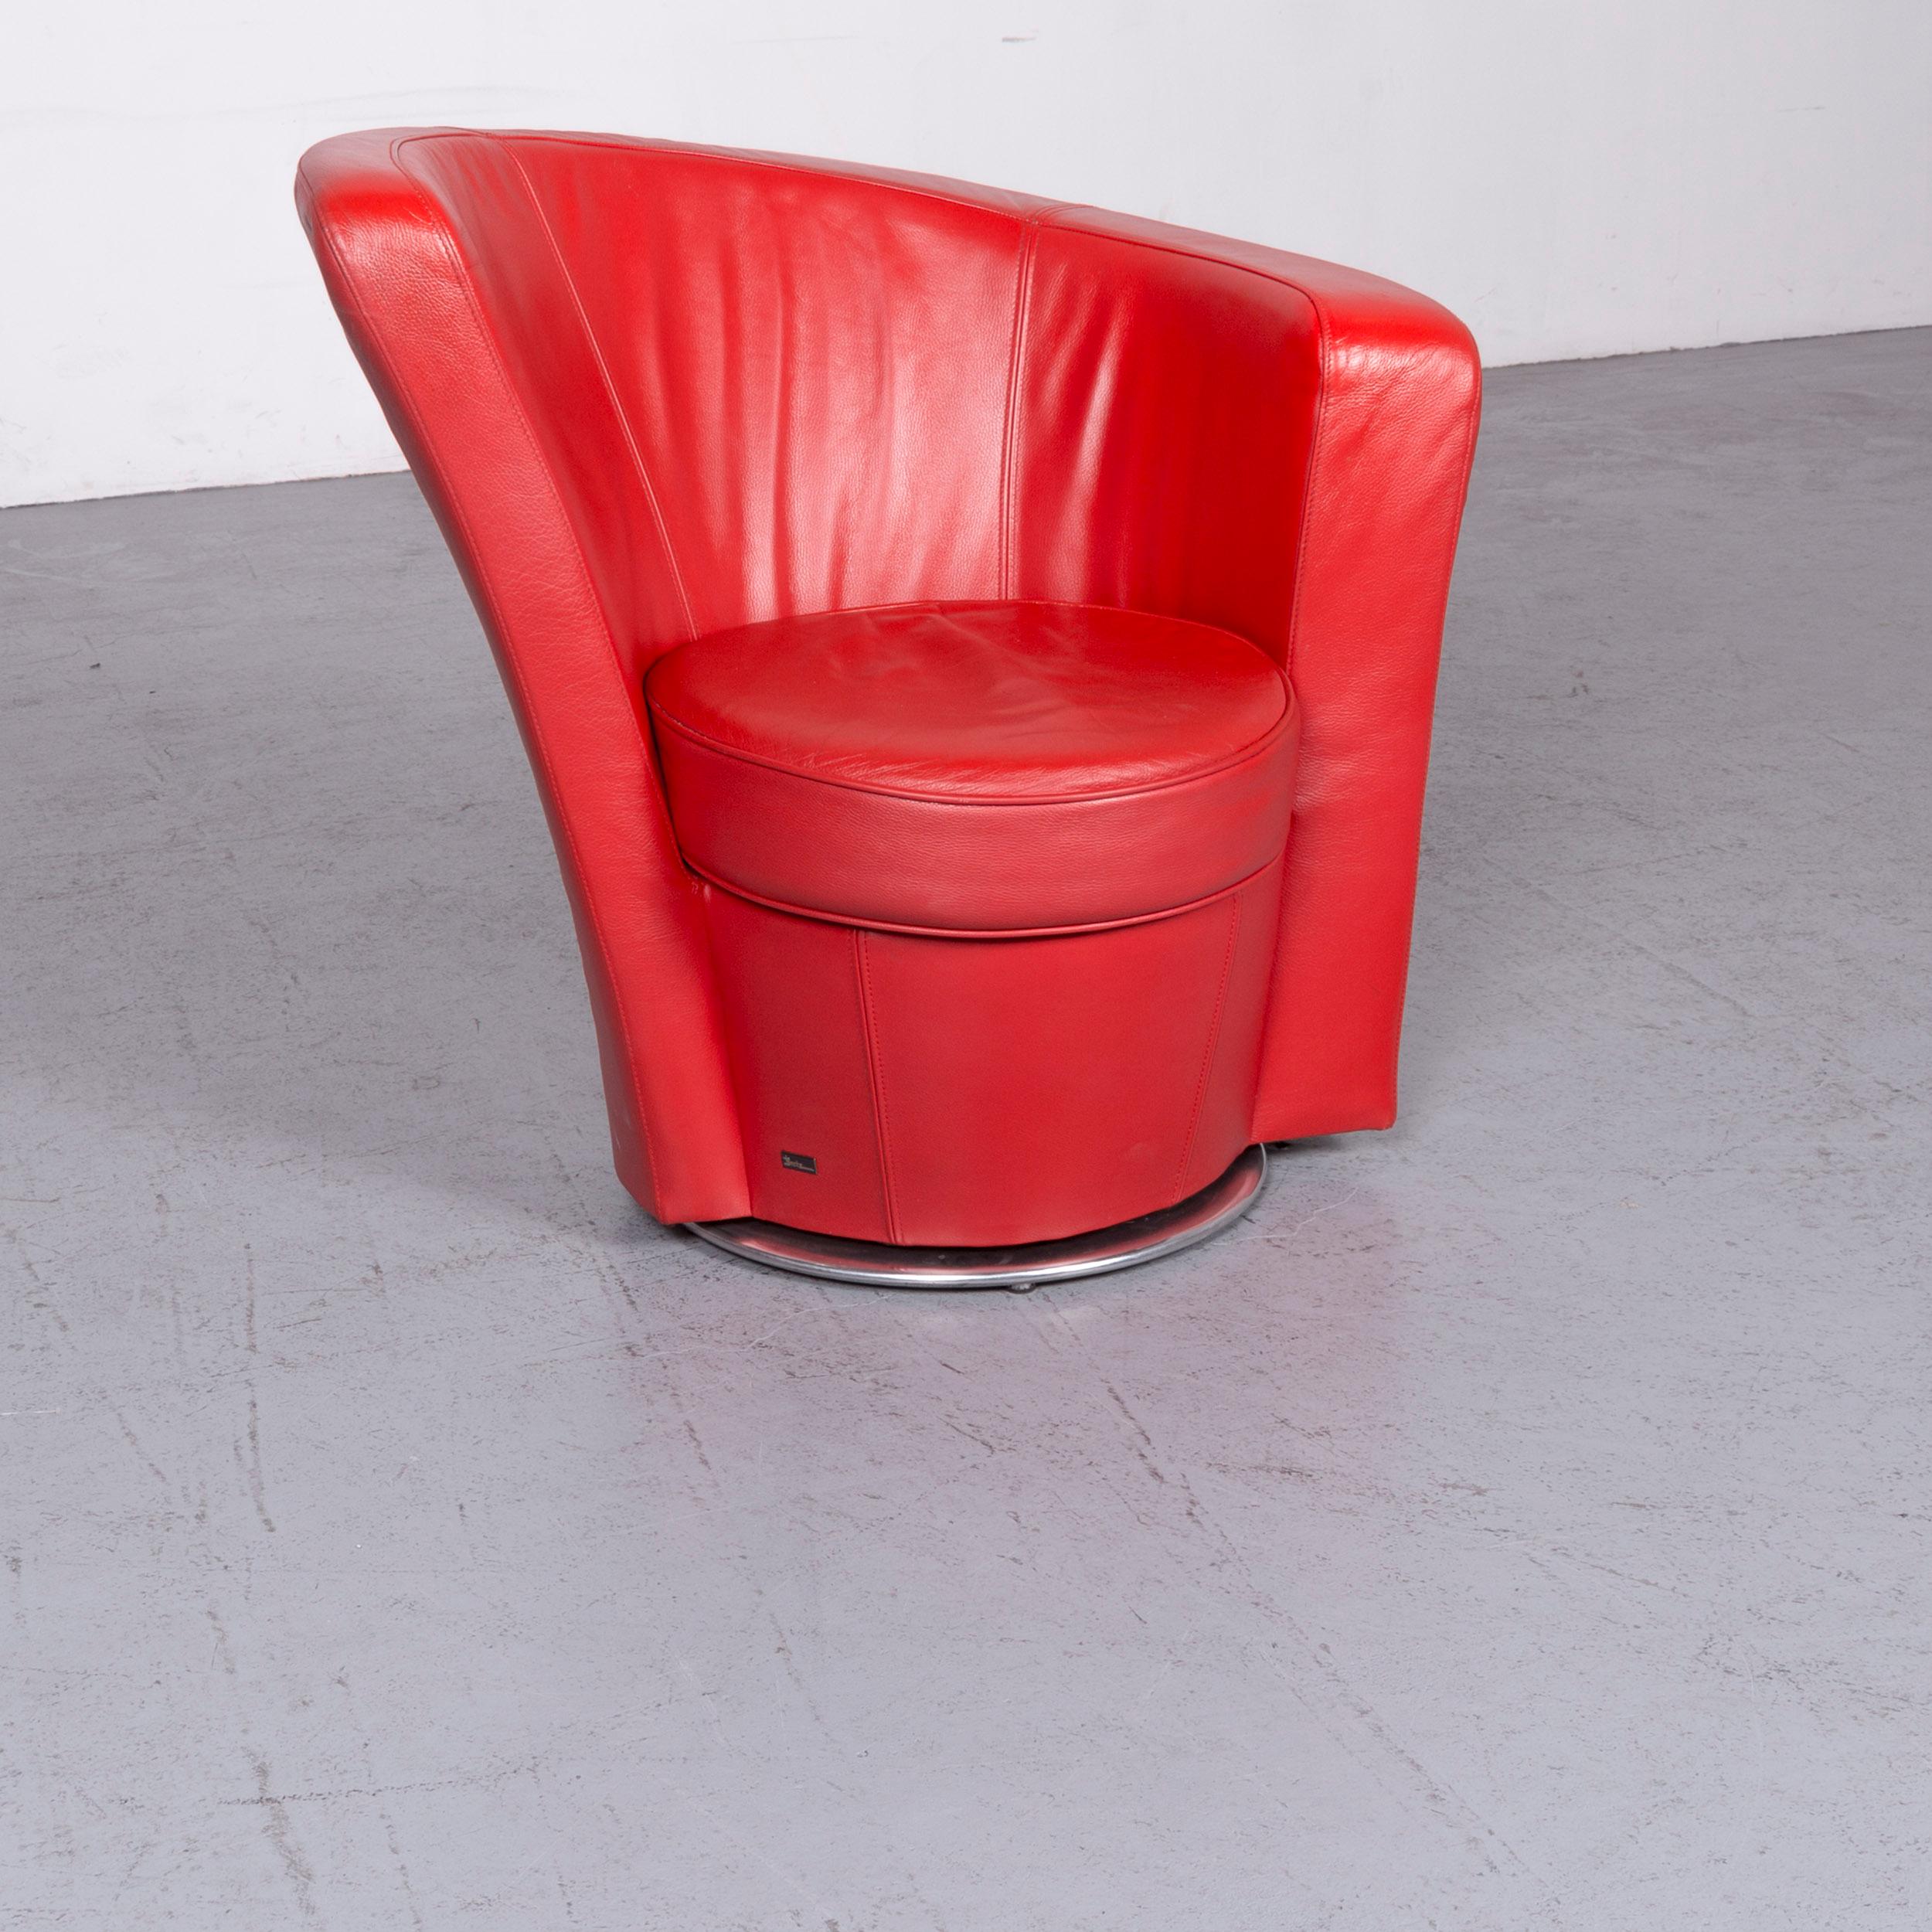 We bring to you a Bretz Eves Island leather armchair set red one-seat chair.














































































